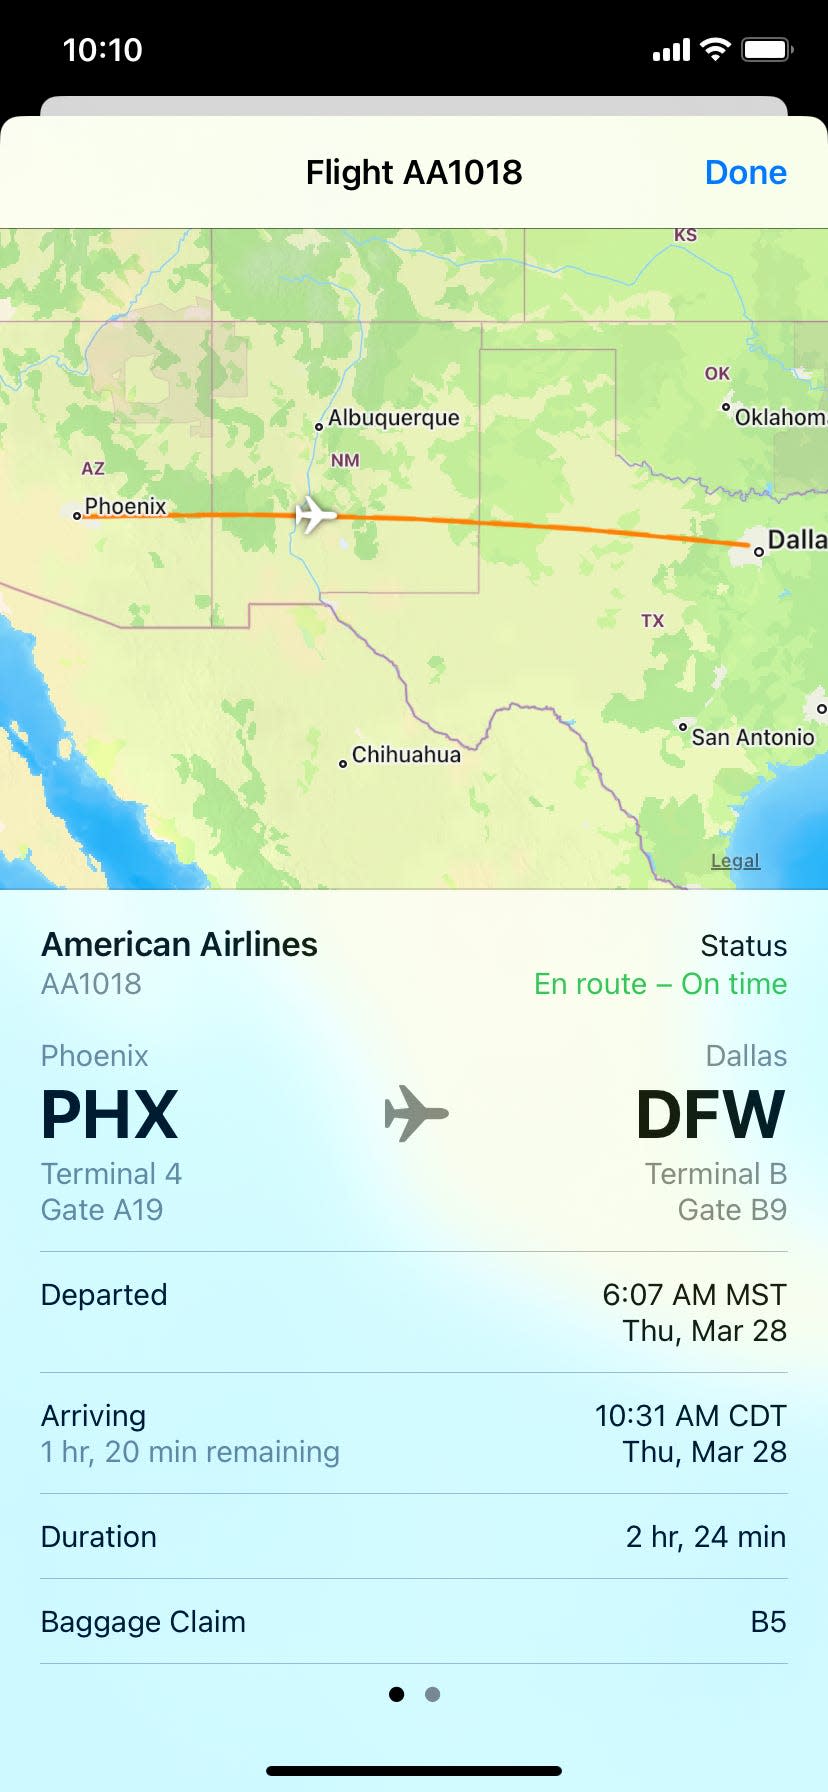 A screenshot of information about a flight from Phoenix to Dallas, including status, departure and arrival terminals and gates, flight duration, and baggage claim.